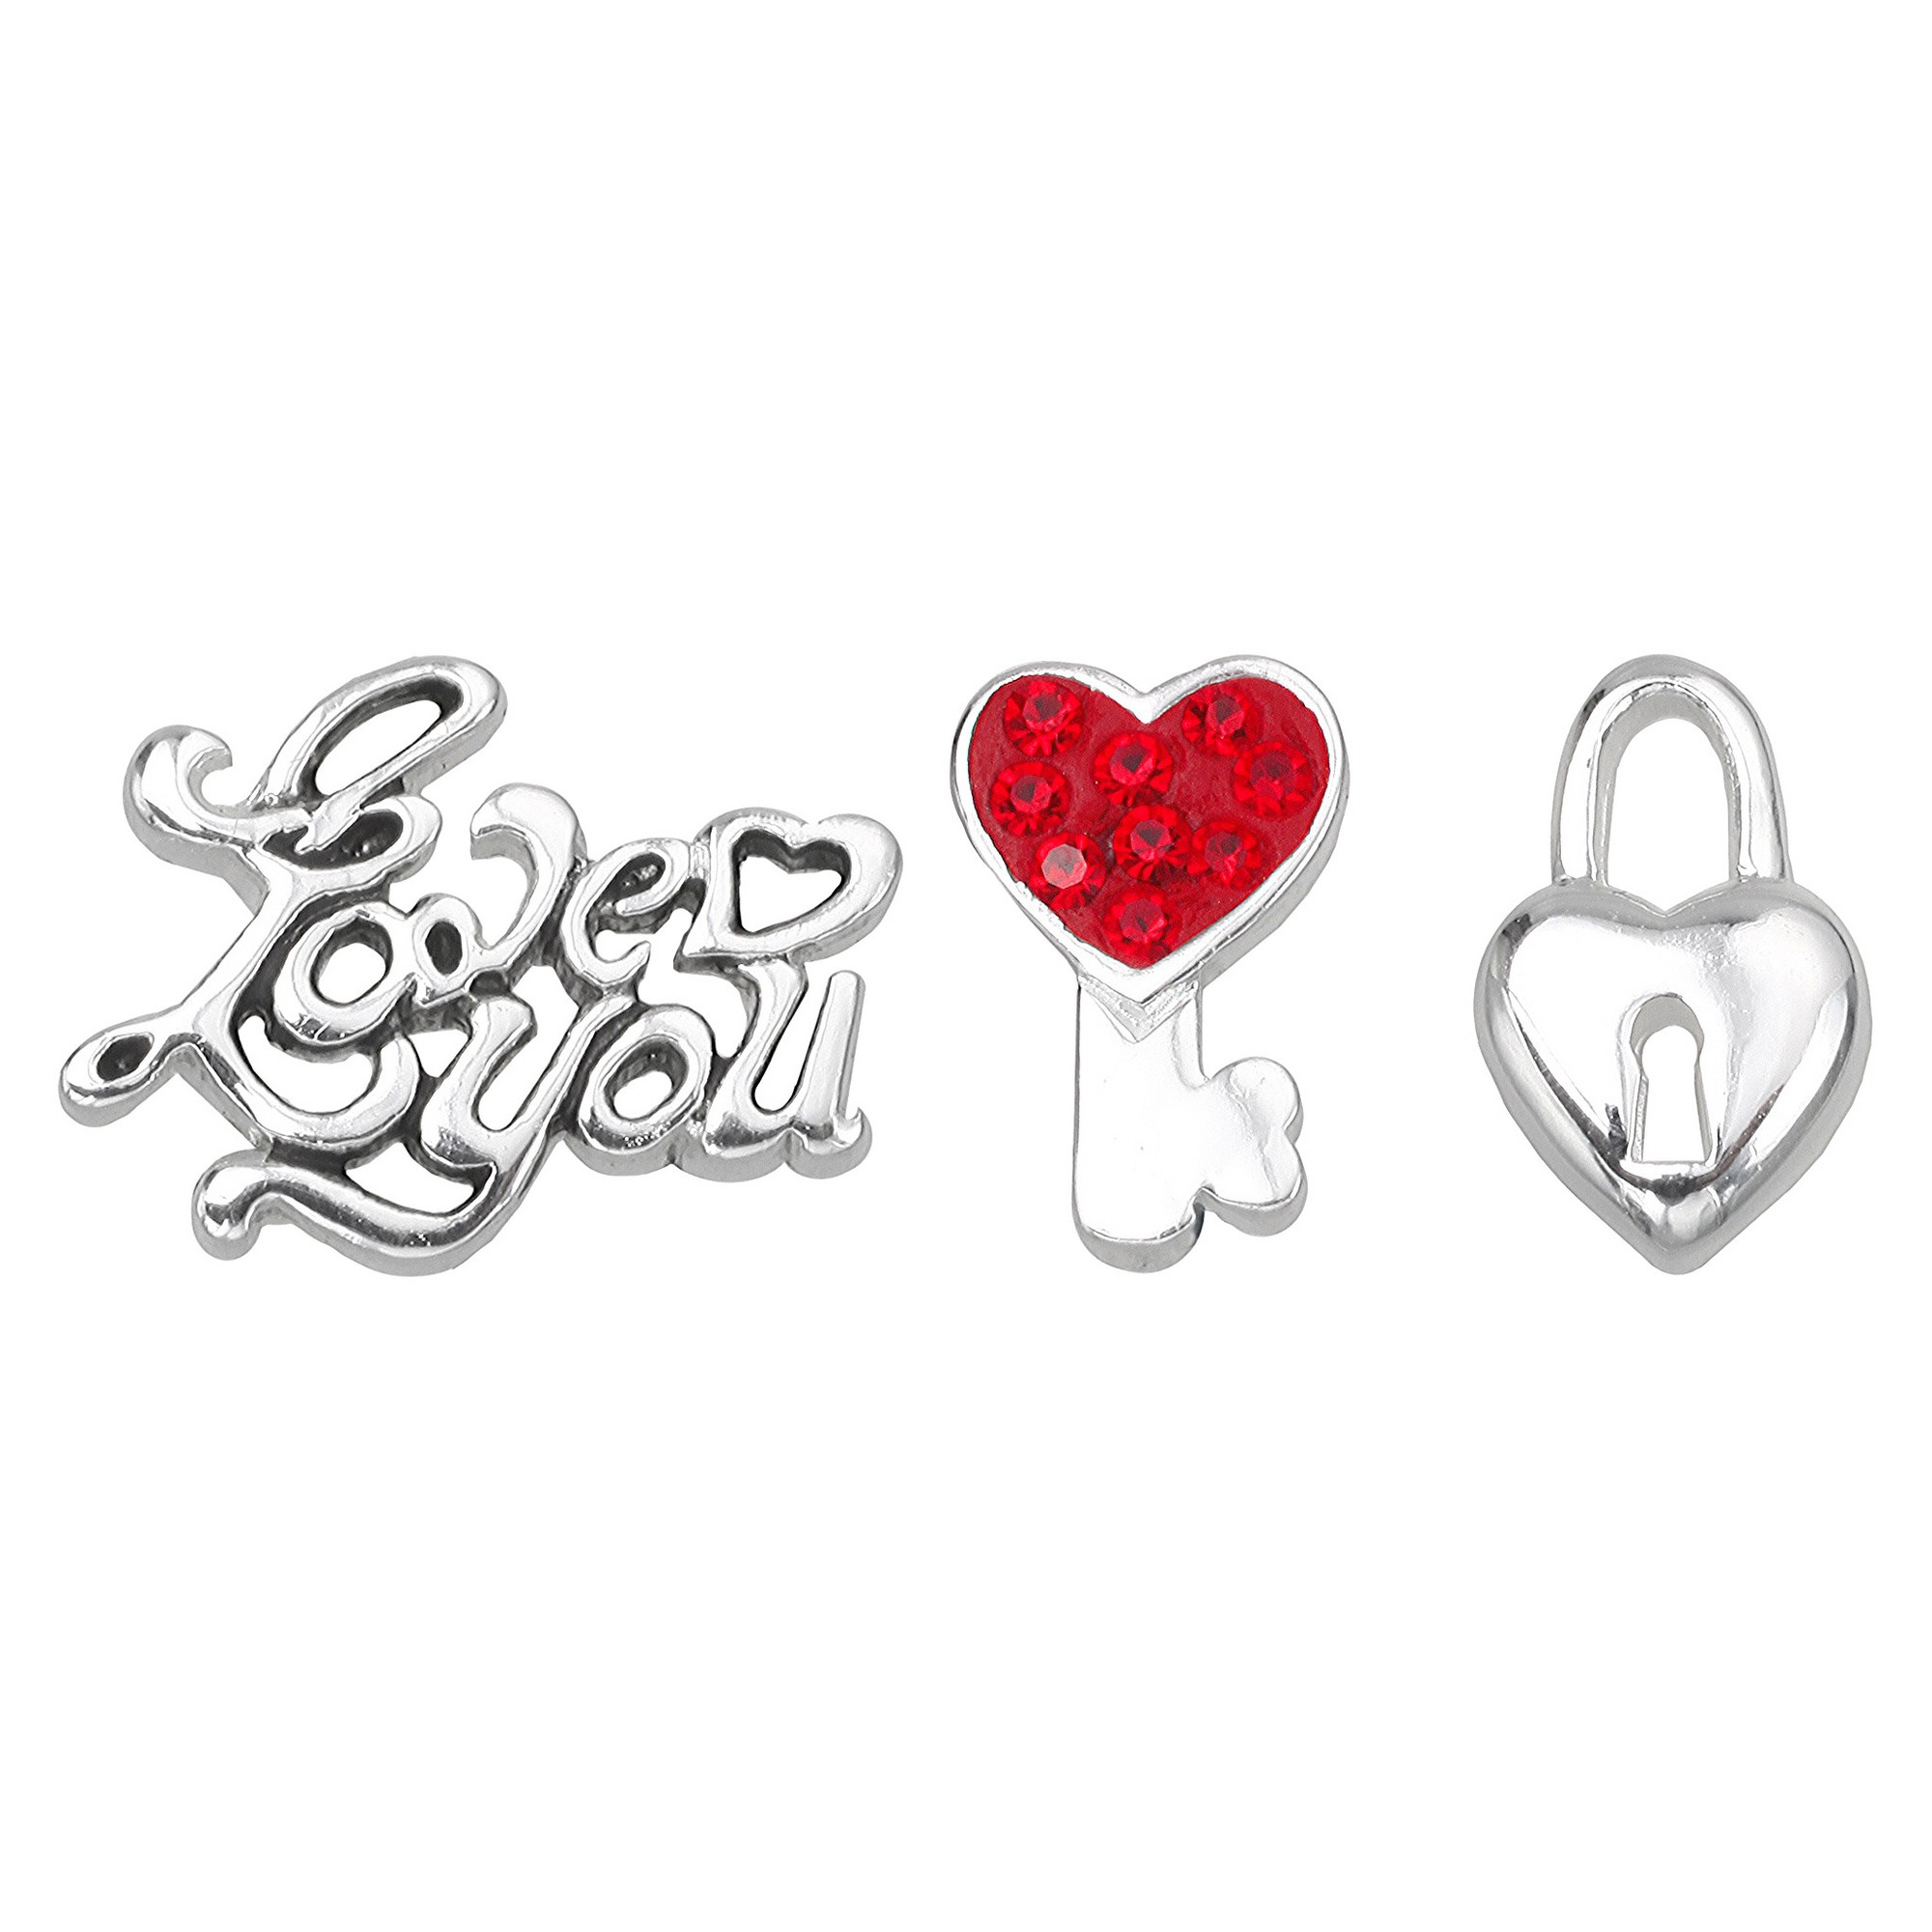 'Treasure Lockets 3 Silver Plated Charm Set with ''I Love You'' Theme - Silver/Red, Women's, Red/Silver'